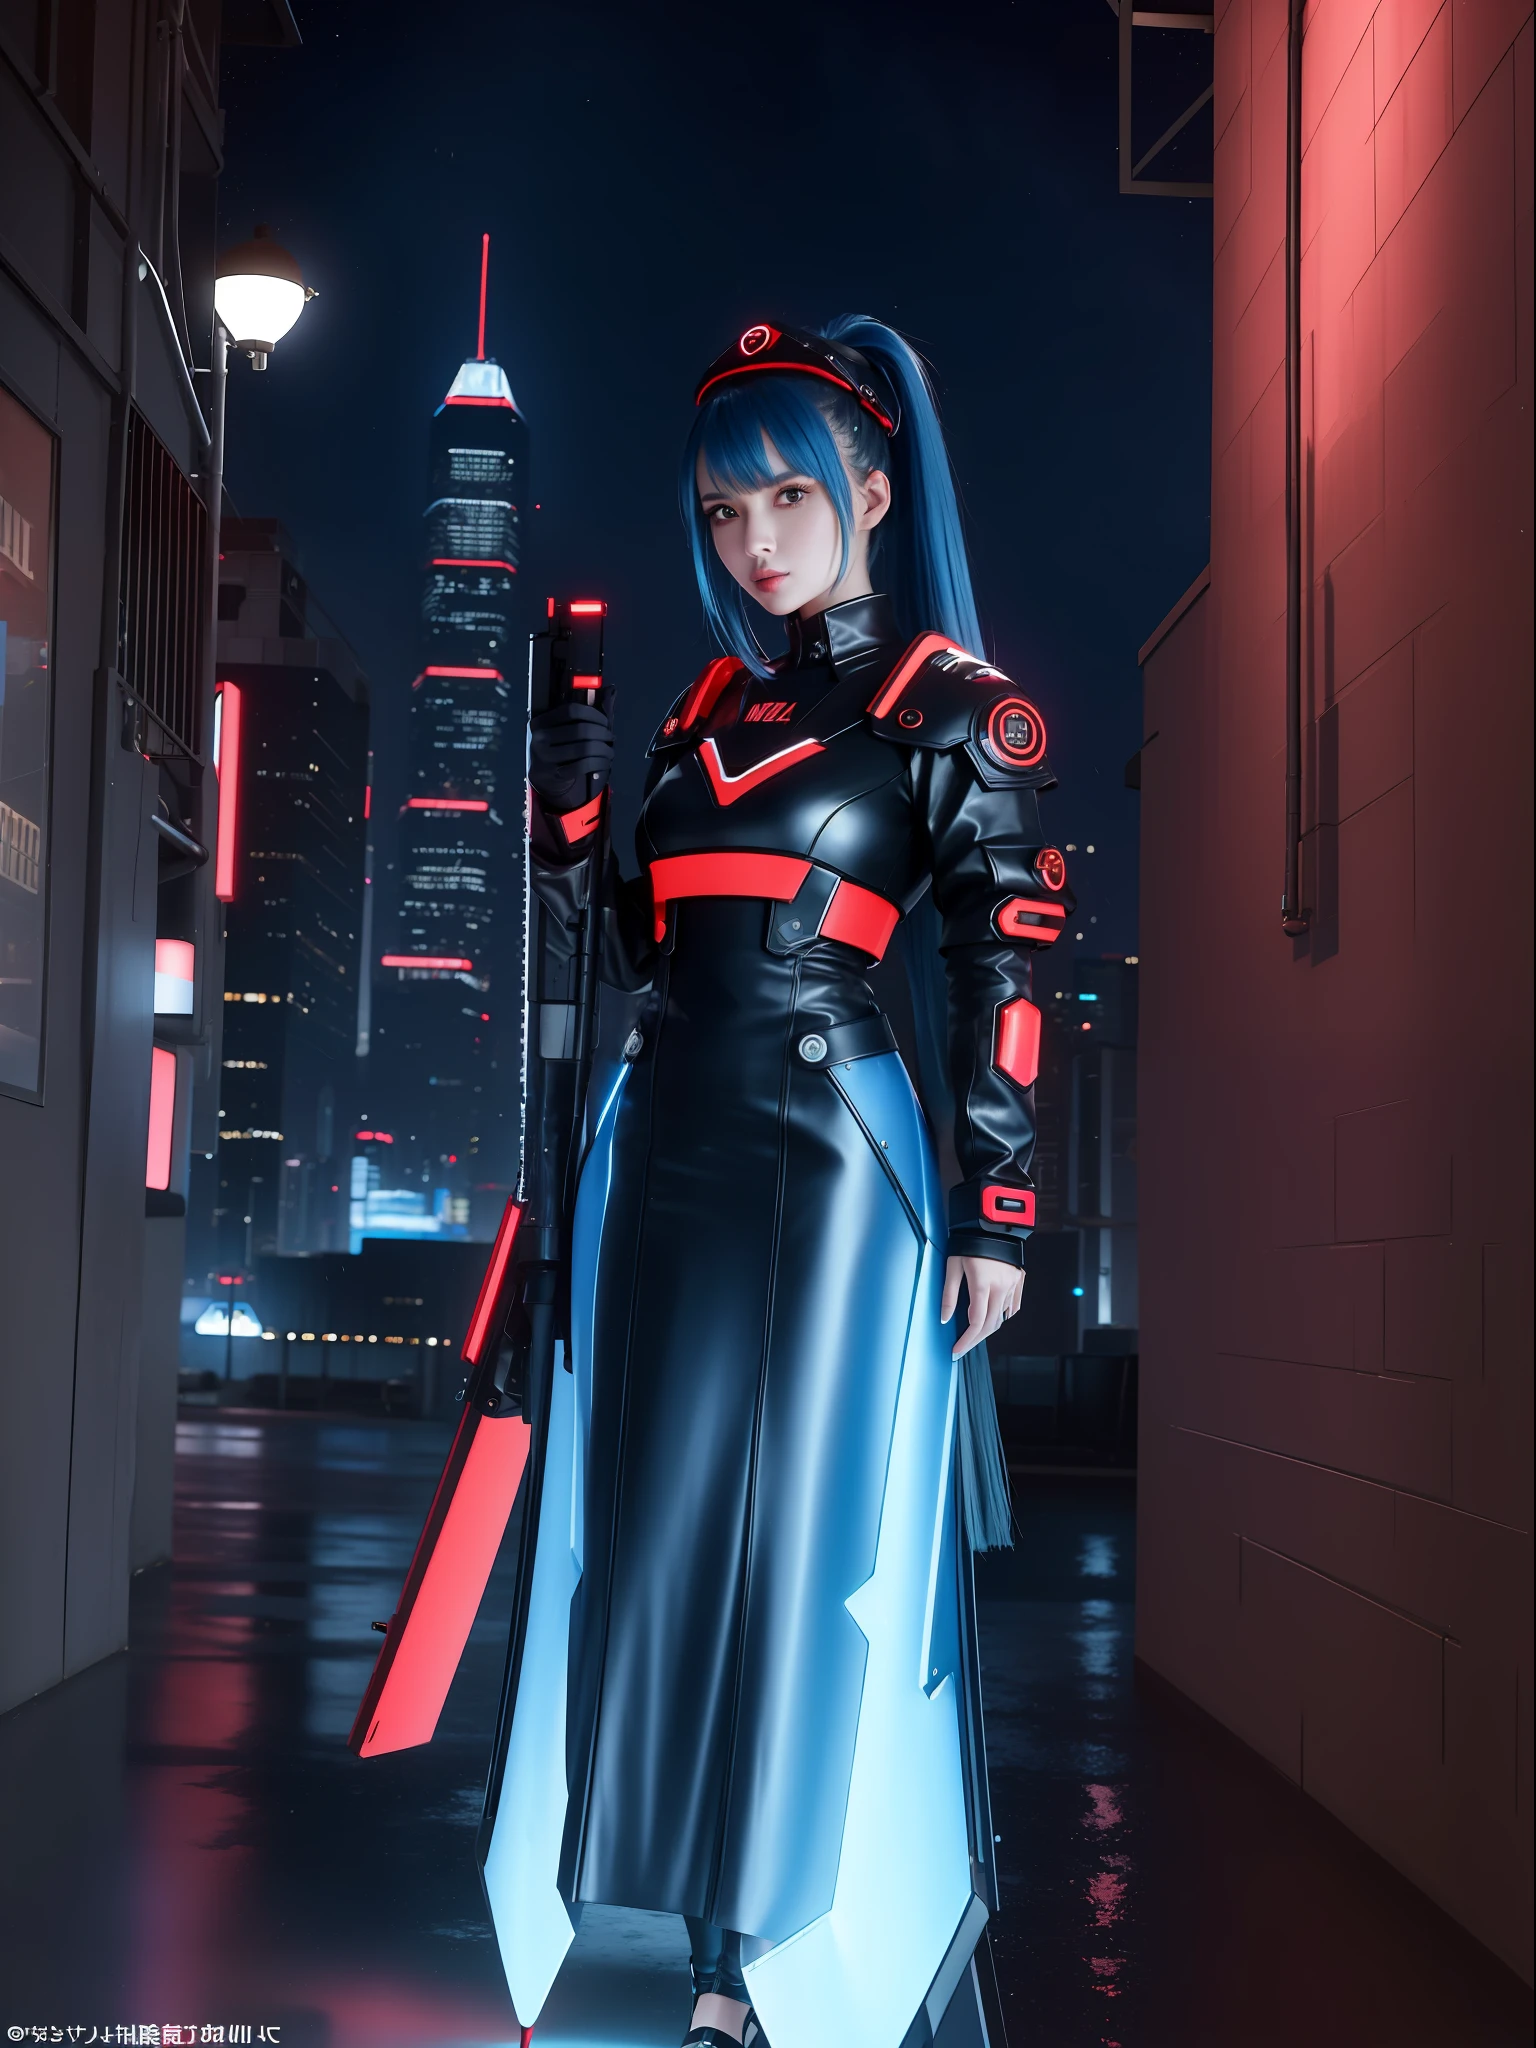 (full body photo:1.9), (A Kawaii Woman:1.5), (wearing red metal cyberpunk outfit|black|futurist blue+with a blue jewel on her breastplate:1.4), (she's in a futuristic city with lots of flying cars+at night+raining hard:1.5), (she has mohawk hair roza:1.3), (she has blue eyes:1.3), (she's holding futuristic weapons+sorting+staring at the viewer:1.5),  Hyperrealism, 16k, best quality, high details, UHD